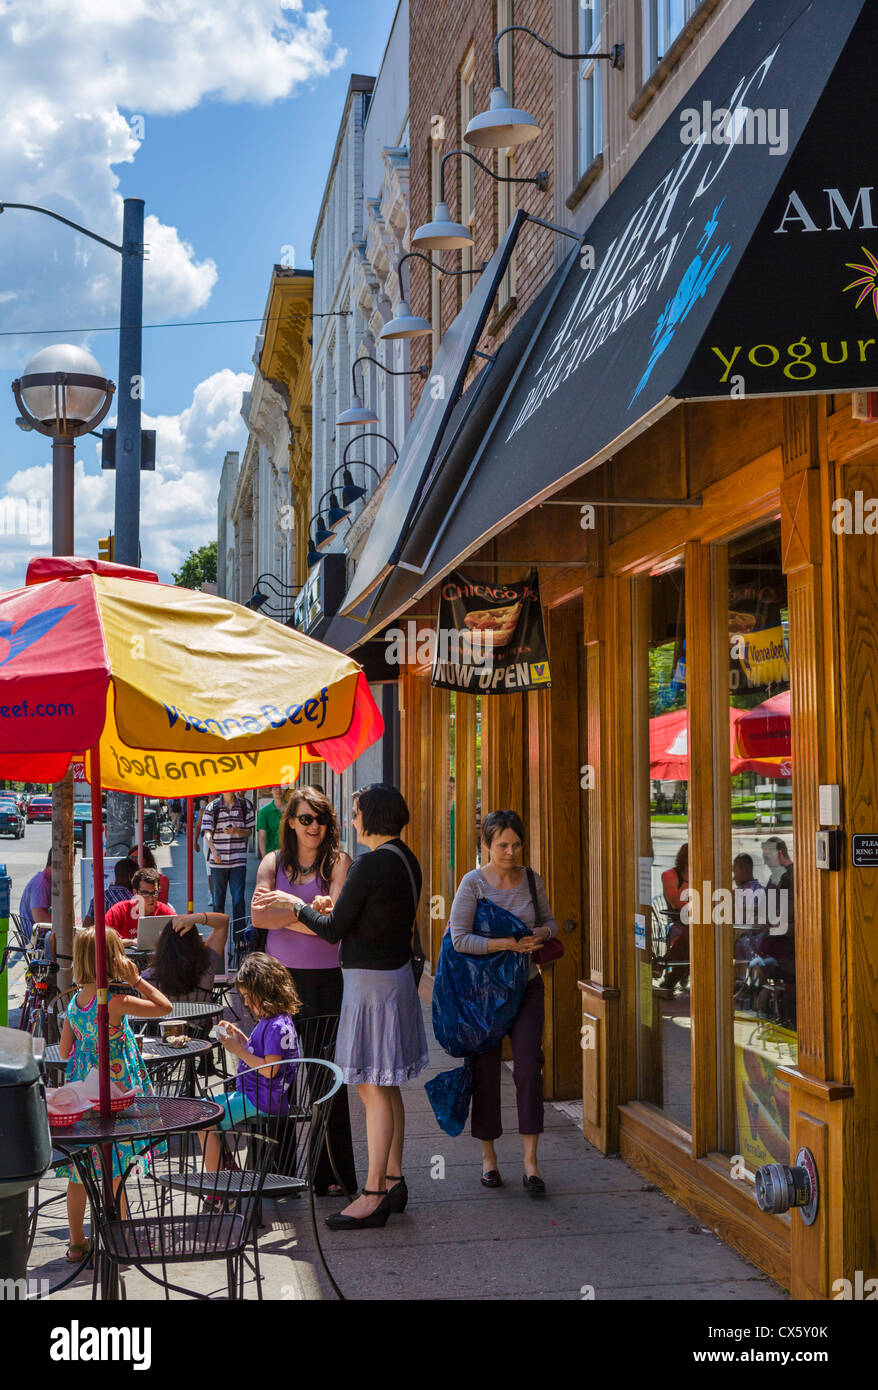 Sidewalk cafe on South State Street in downtown Ann Arbor, Michigan, USA Stock Photo